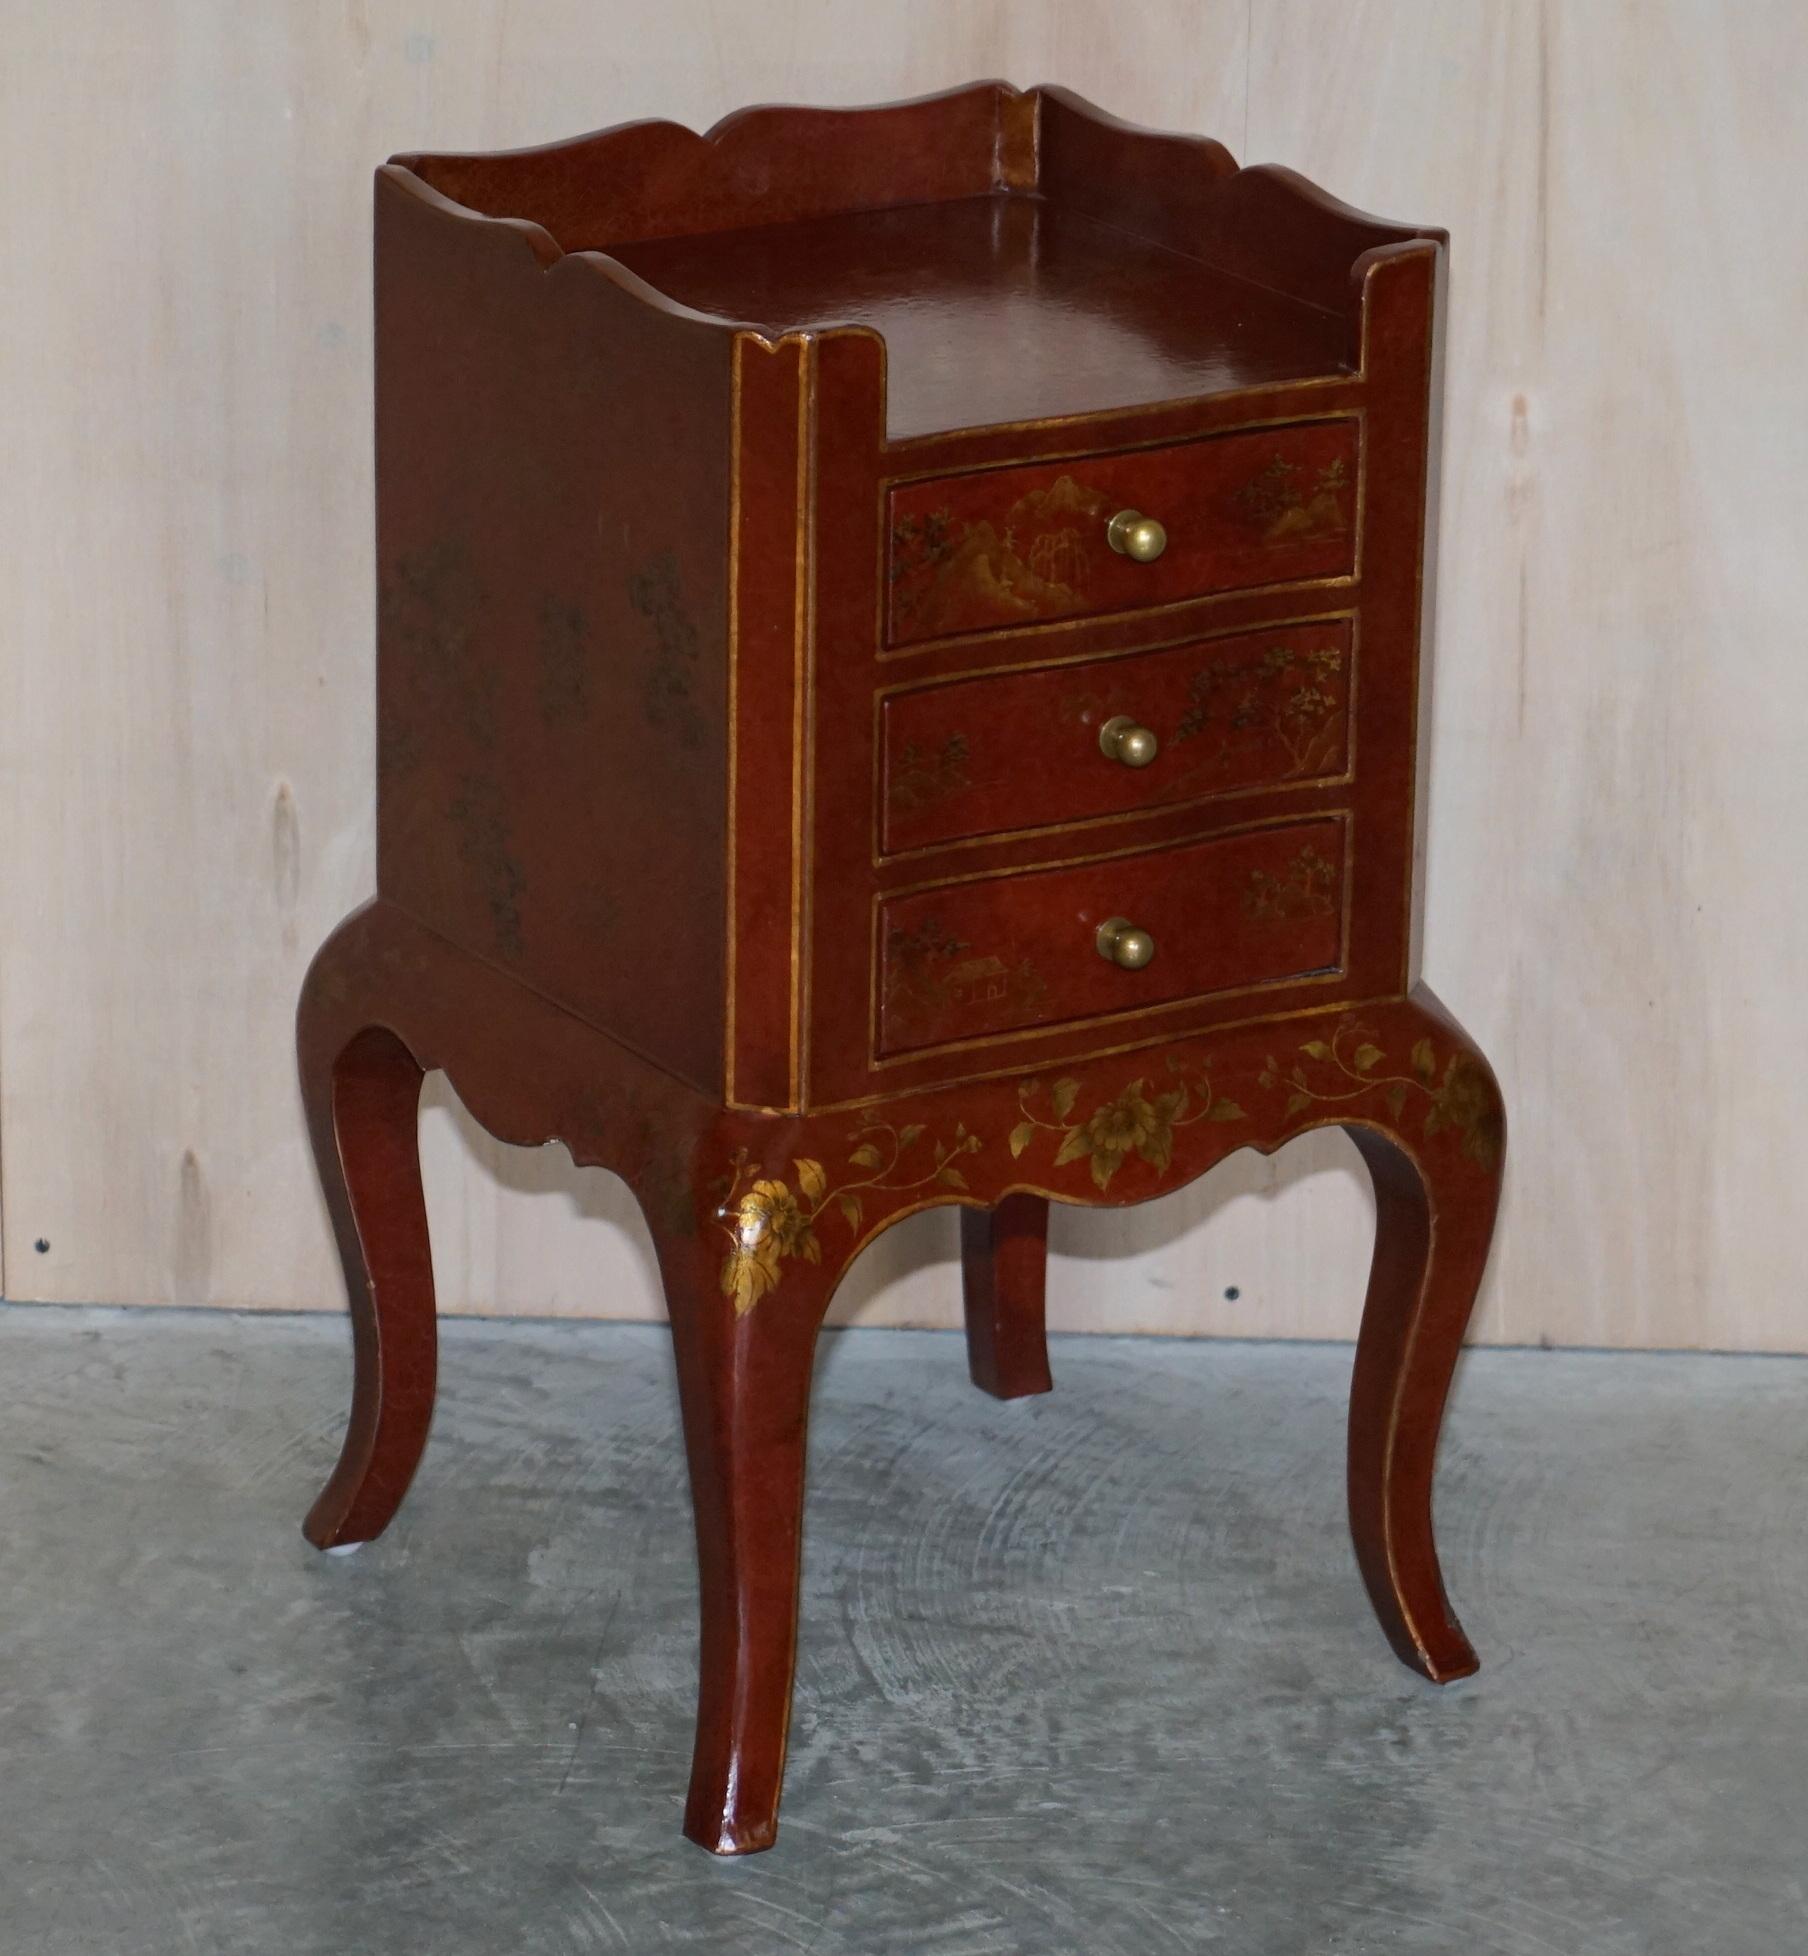 We are delighted to offer this lovely pair of Chinese Chinoiserie red lacquer three drawer bedside / side lamp tables

A very good looking well made and decorative pair, the finish is exquisite, they look expensive, important and sophisticated